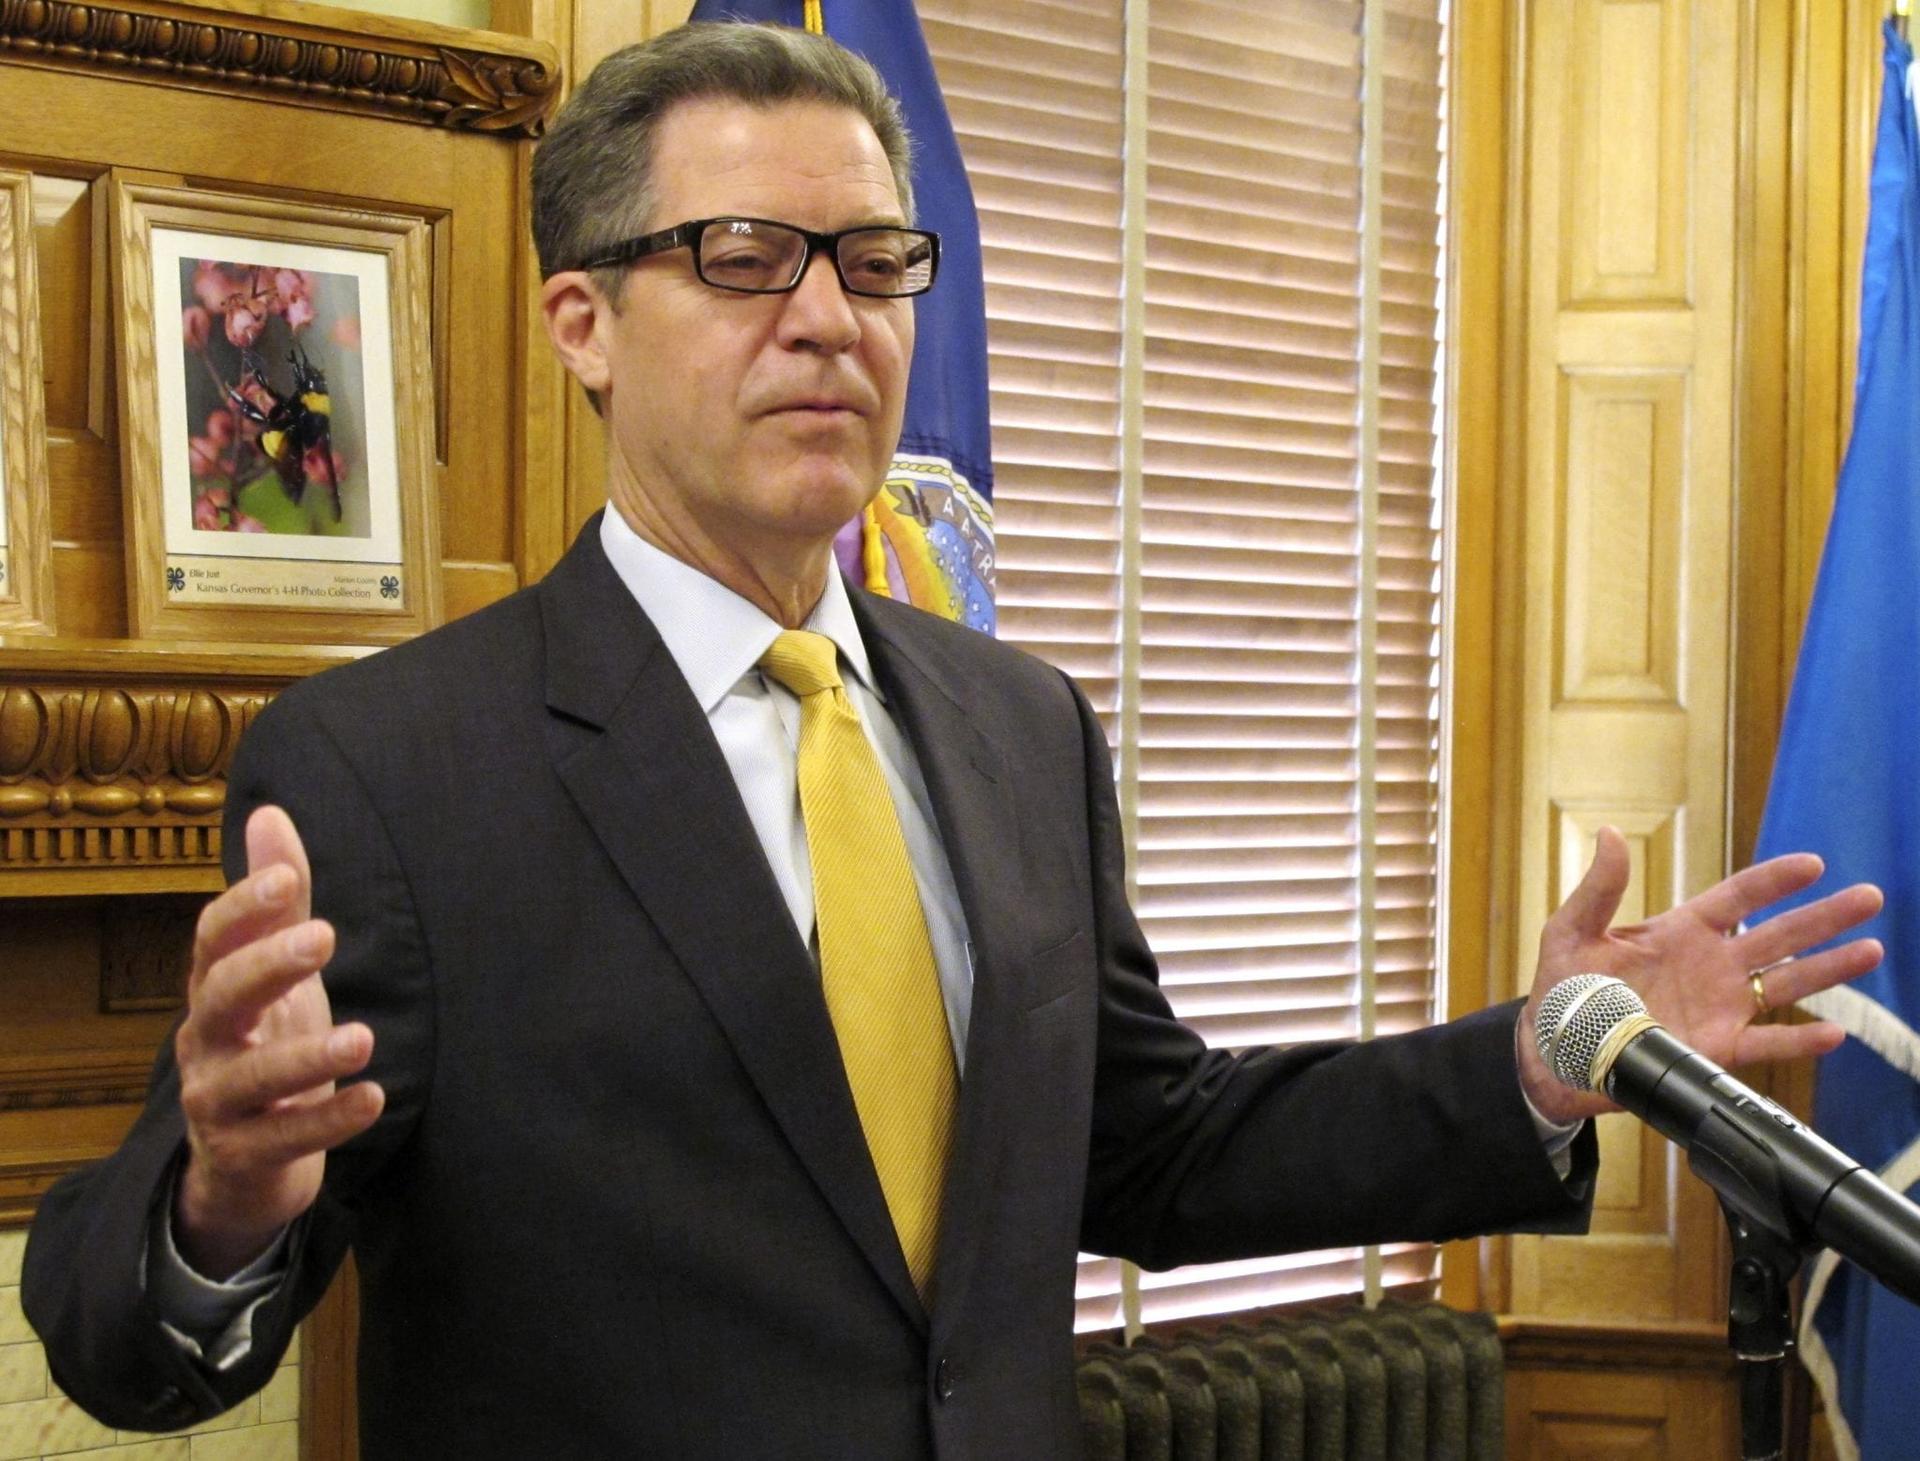 Brownback sees ‘Iron Curtain moment’ looming on religious freedom